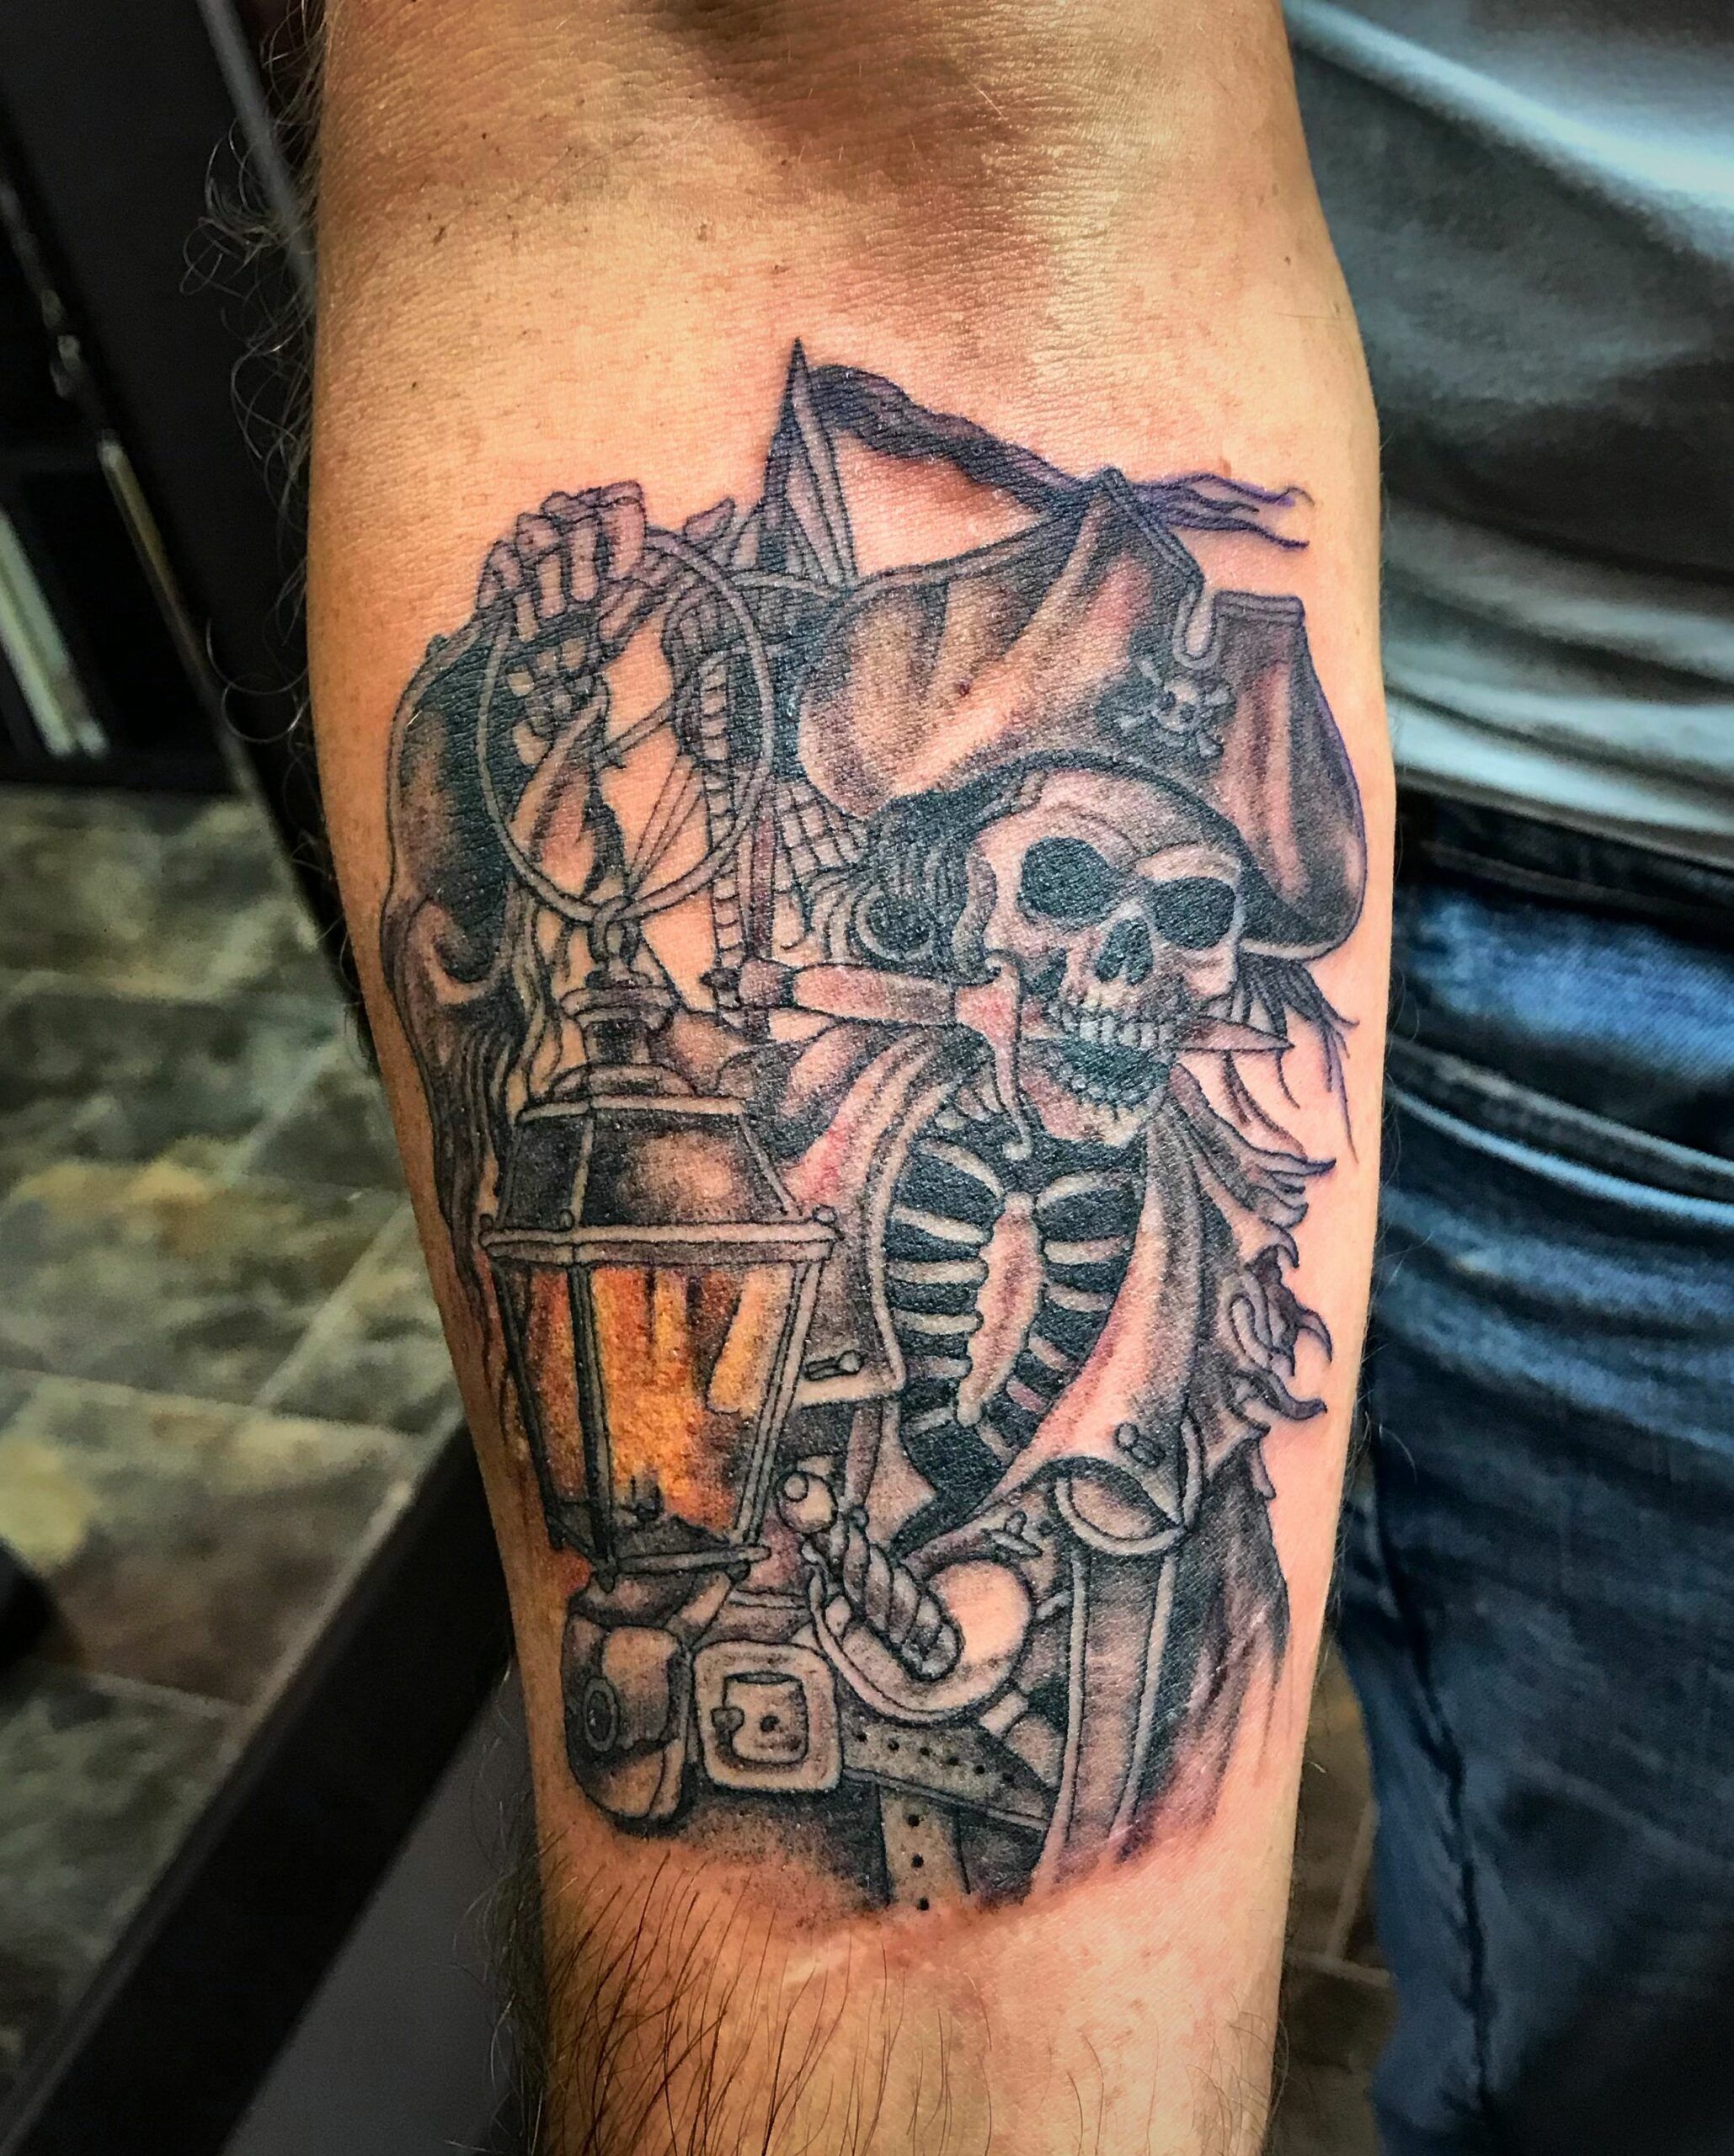 Pirate Tattoos Meanings